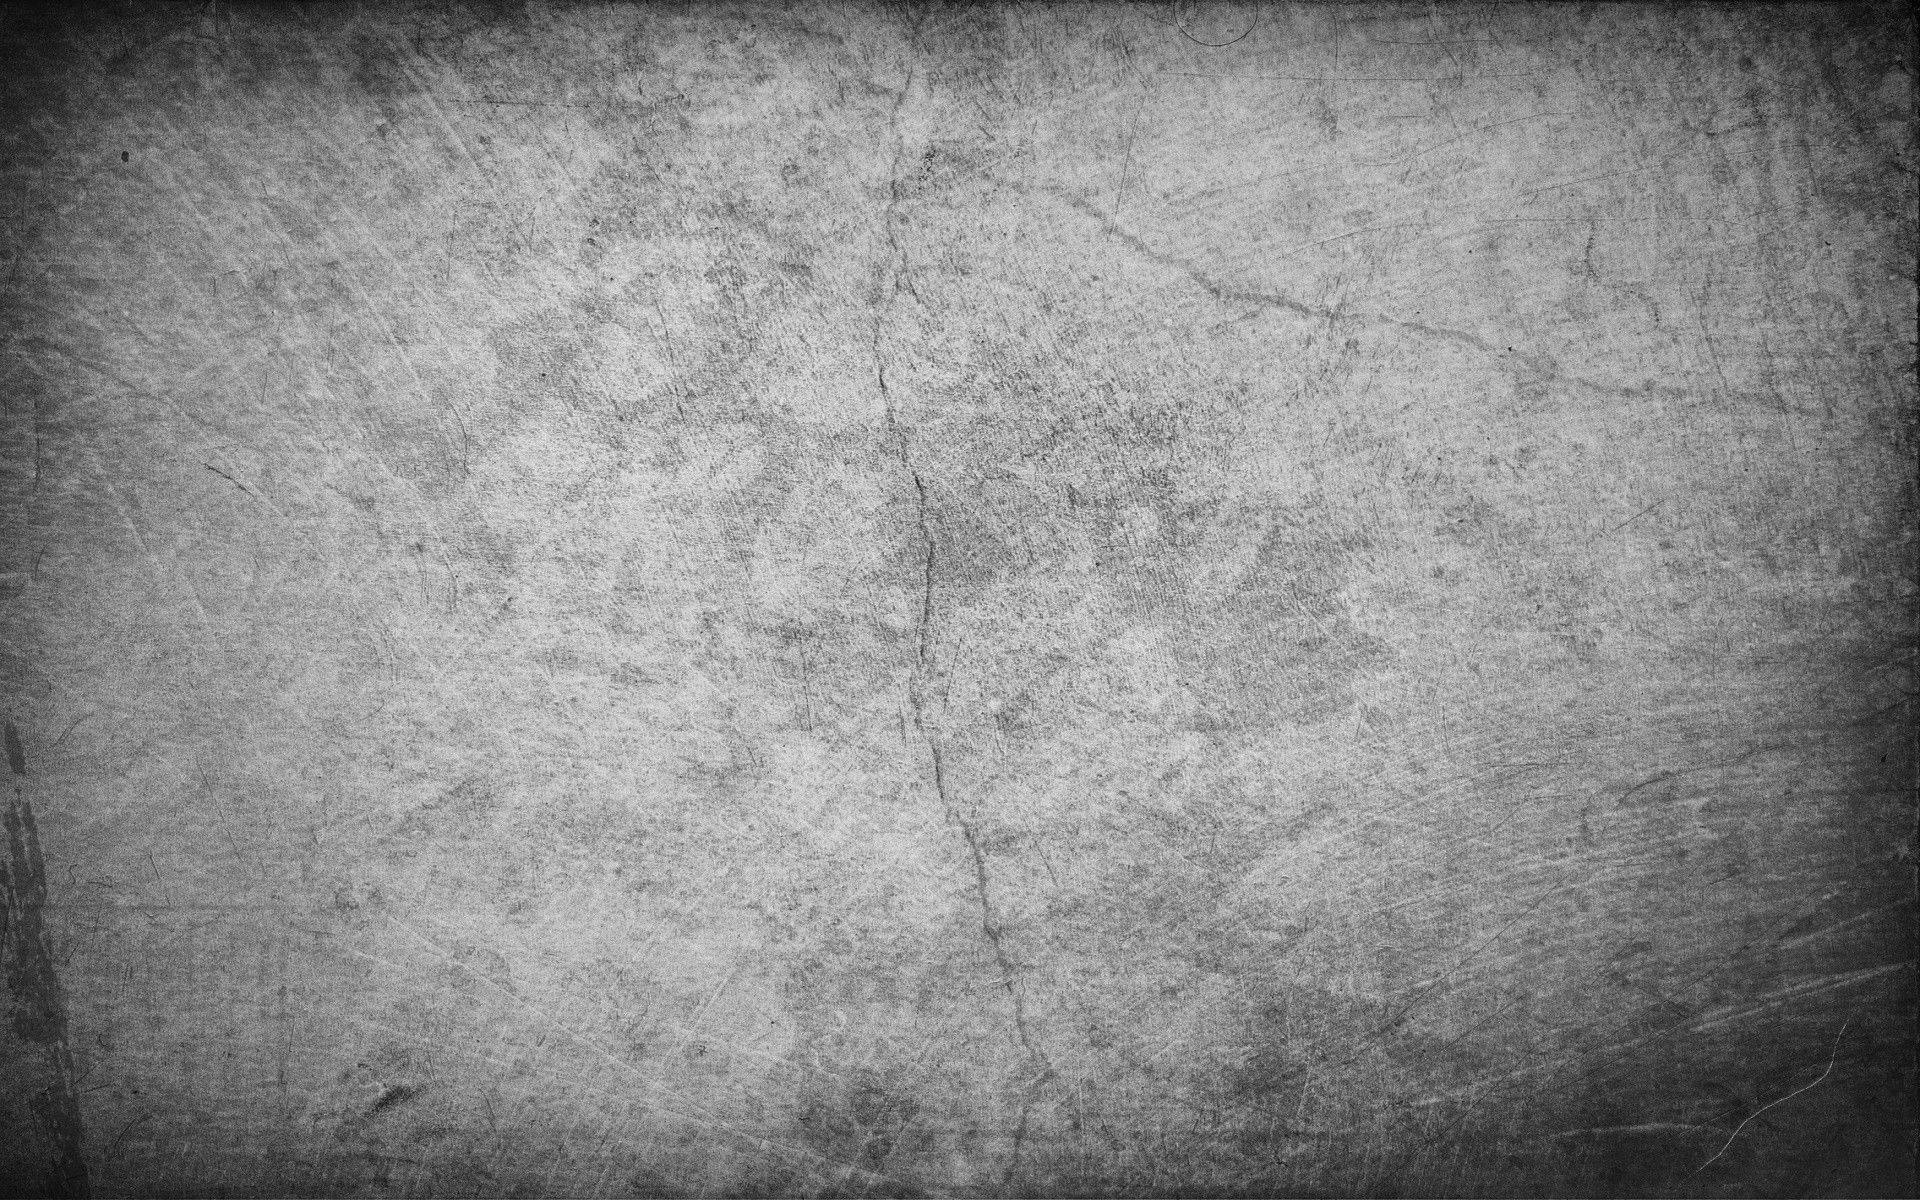 Image  Aged Cracked Texture of Grunge Wallpaper Wallpaper